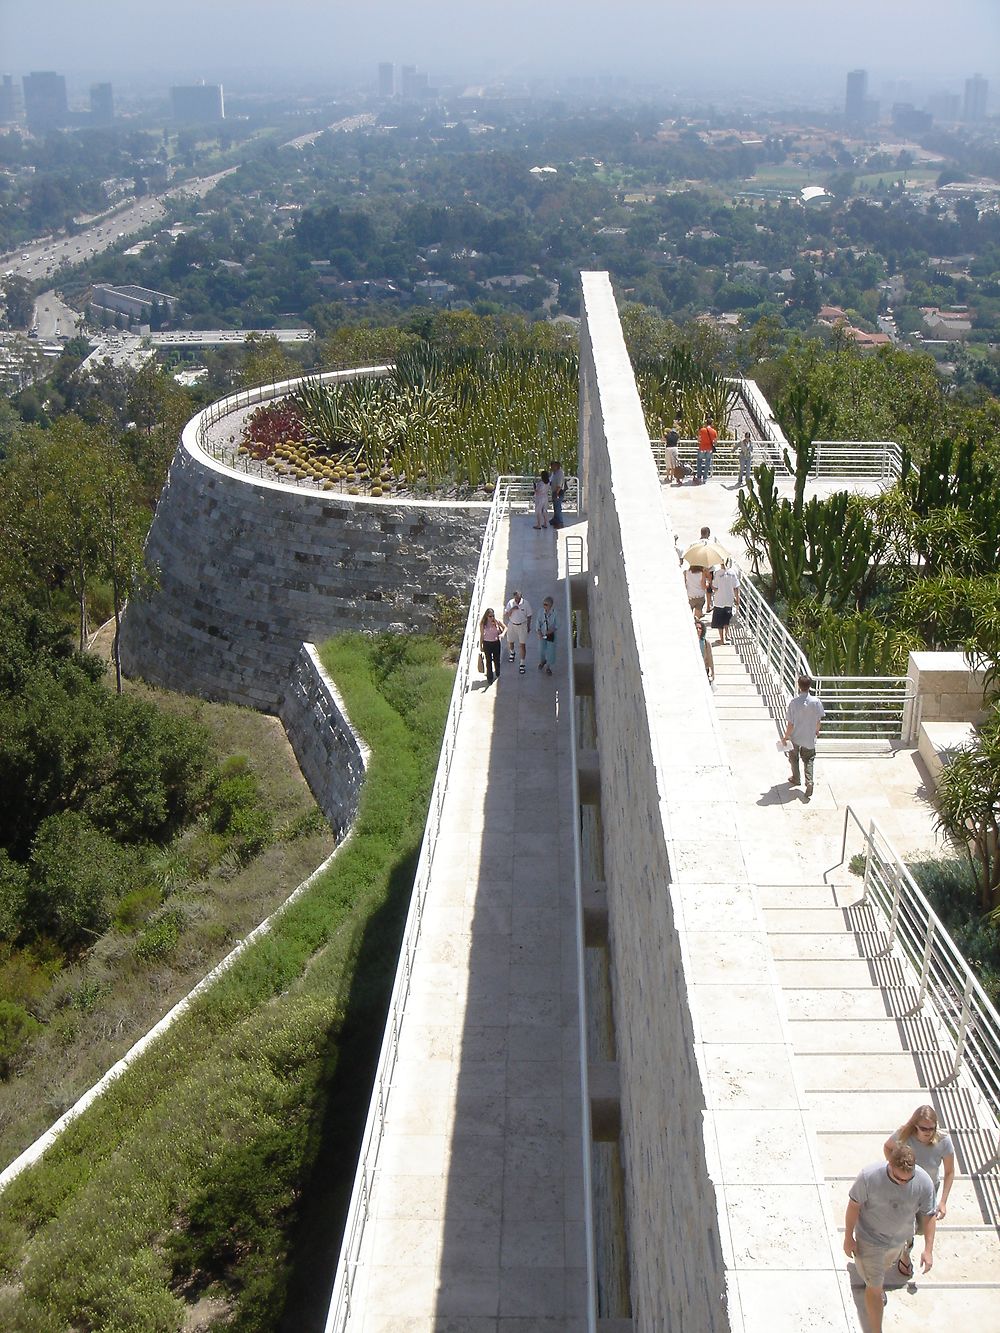 Getty center, Brentwood